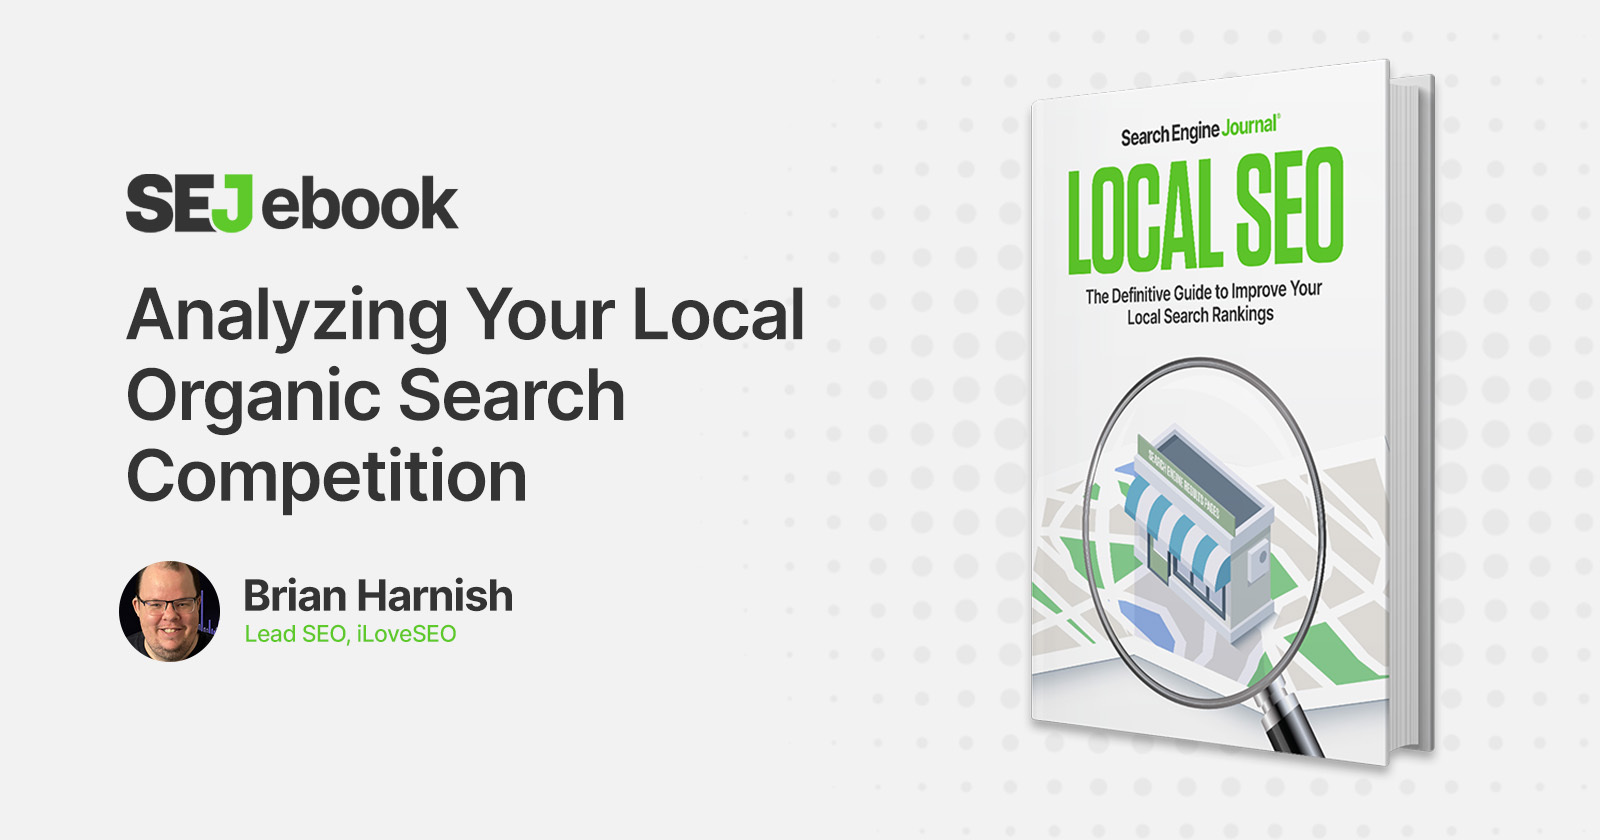 Analyzing Your Local Organic Search Competition via @sejournal, @BrianHarnish